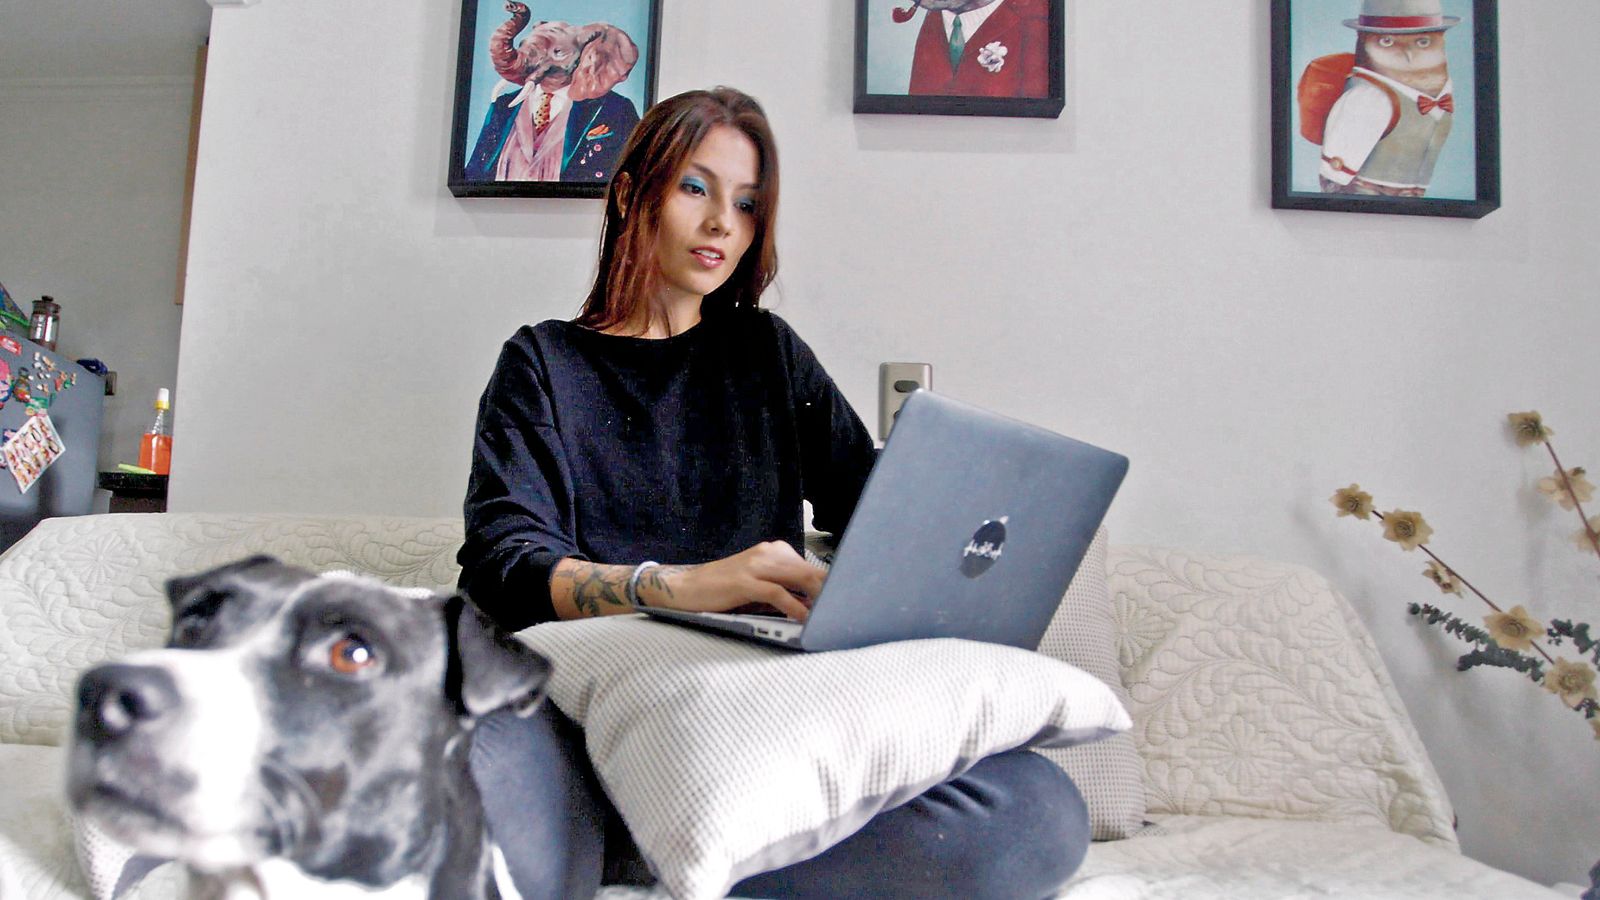 'Rise in staff working from home' as cost of living bites, Acas survey says